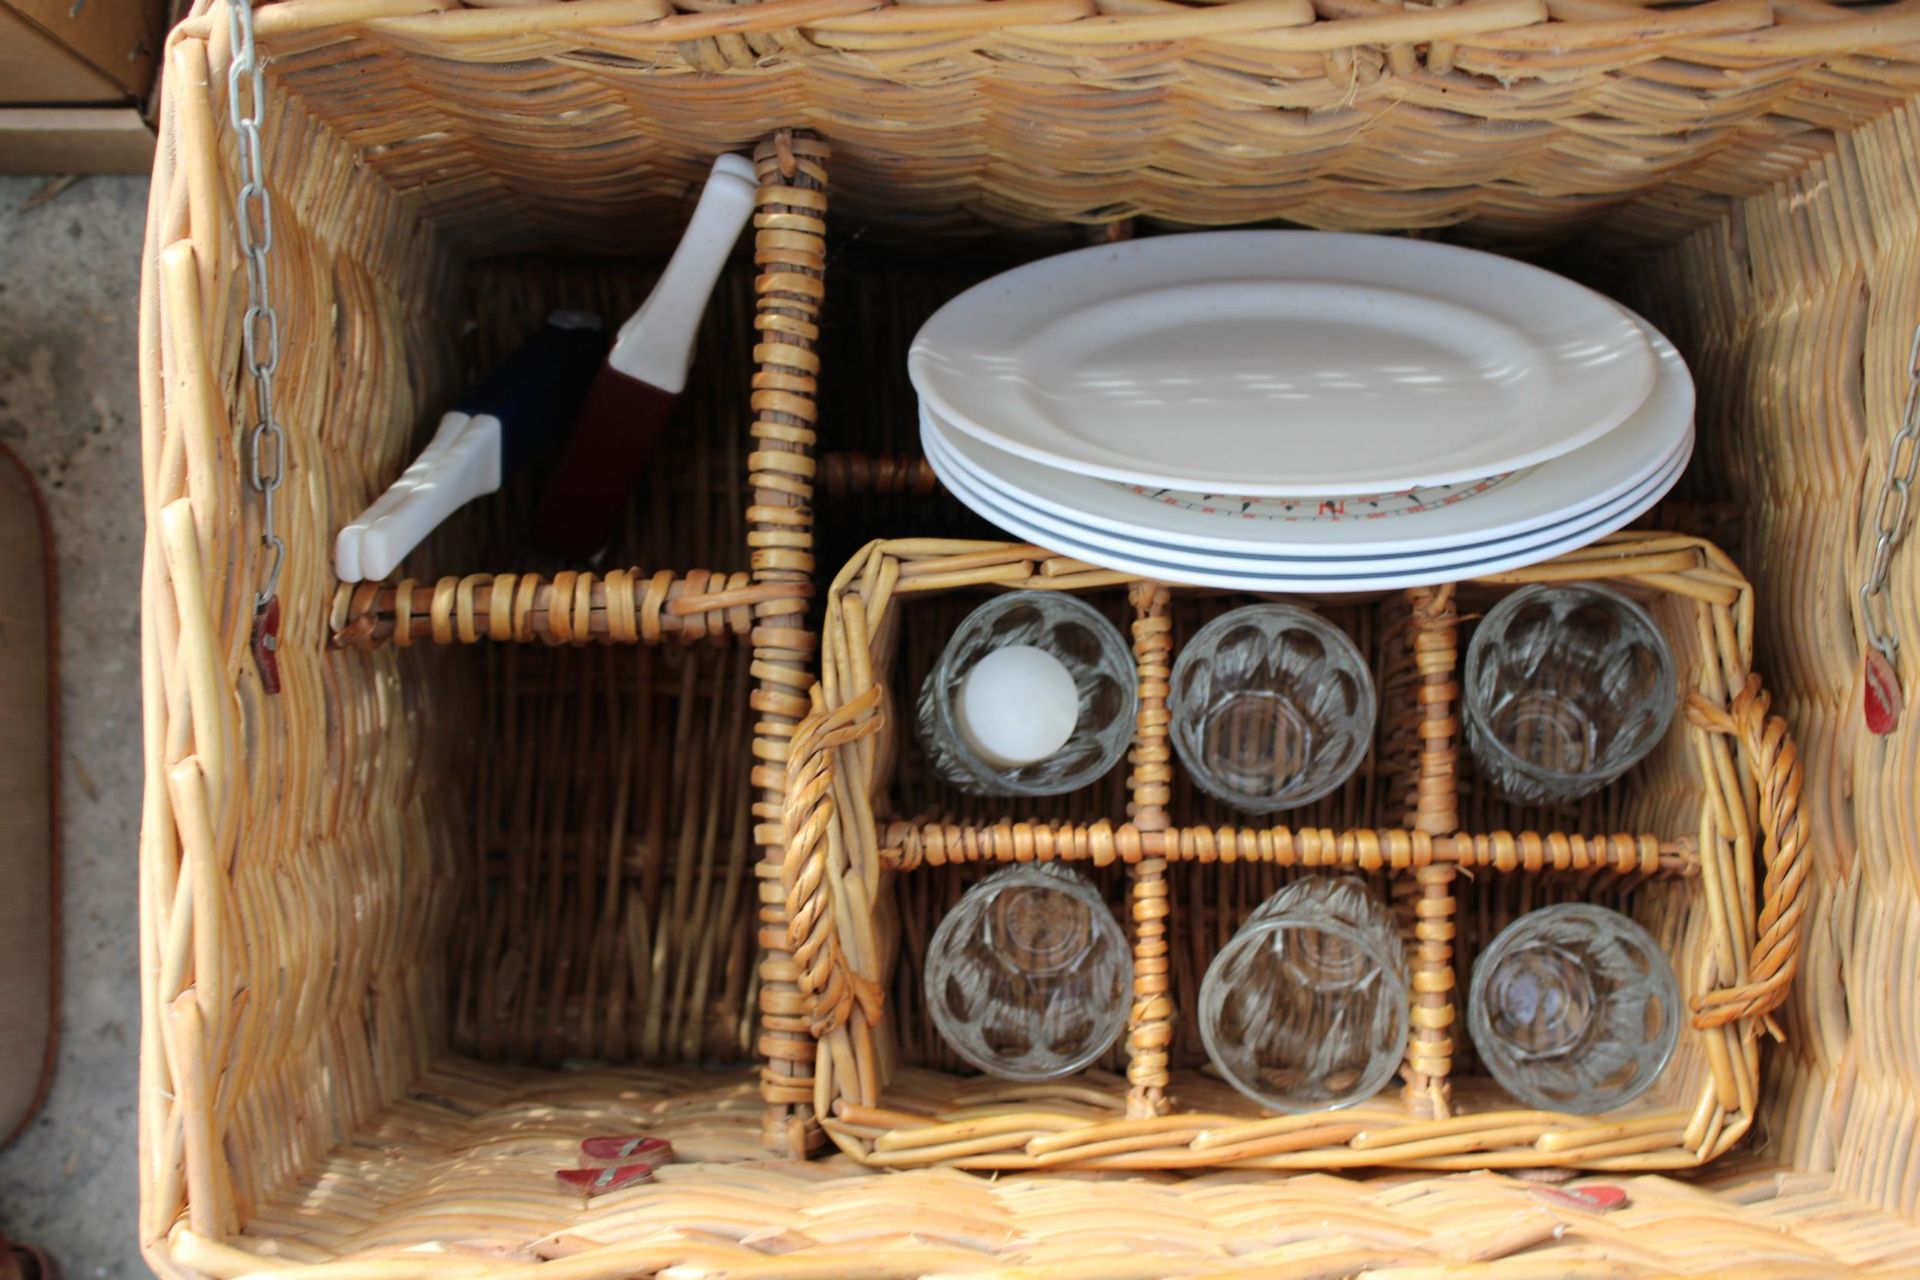 A VINTAGE WICKER LOG BASKET AND A PART COMPLETE WICKER BREXTON HAMPER - Image 3 of 3